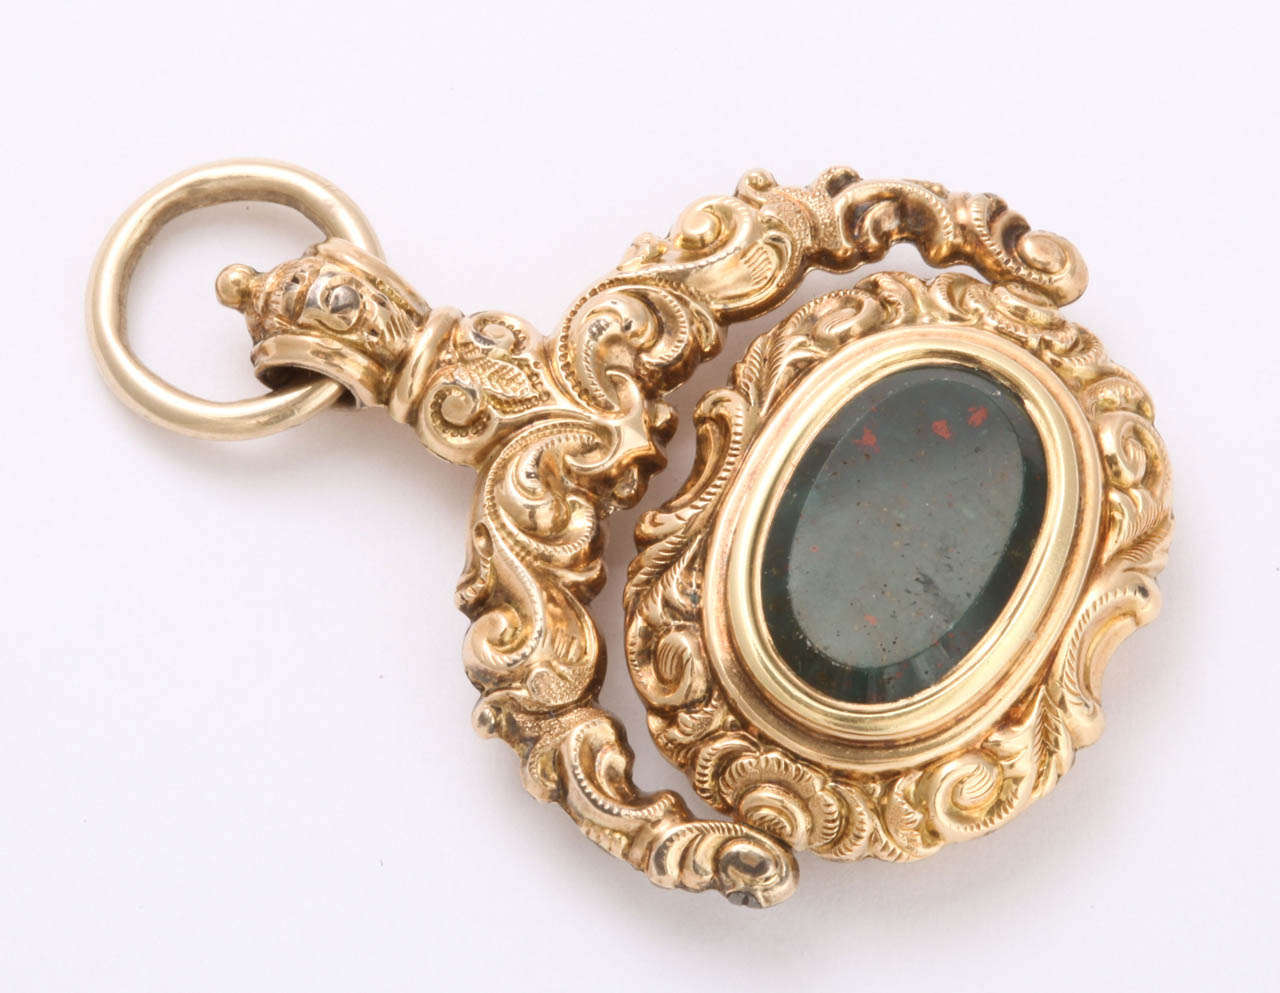 The bloodstone spinning section of this gold engraved fob is sprinkled with  red spots and is bevelled creating a higher center. This fob is handsome. Outstanding is more accurate  as the repousee engraving on the gold and the proportion of the